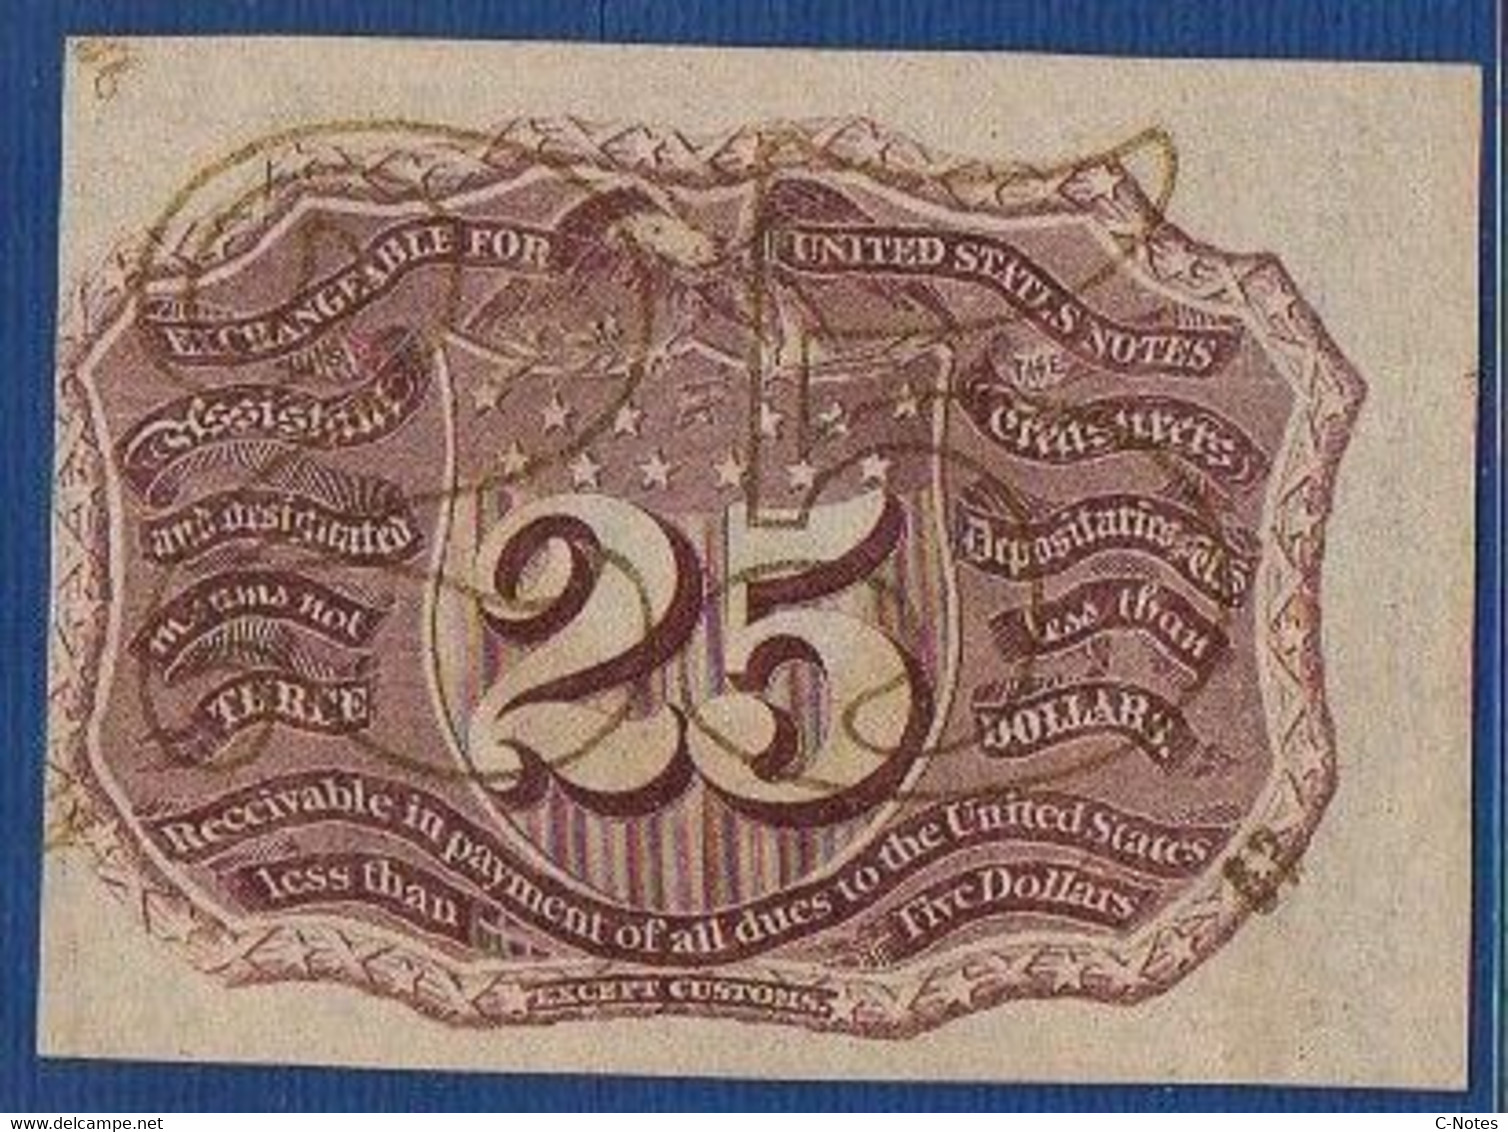 UNITED STATES OF AMERICA - P.103 – 10 Cents 1863 AUNC, No Serial Number - 1863 : 2 Uitgave